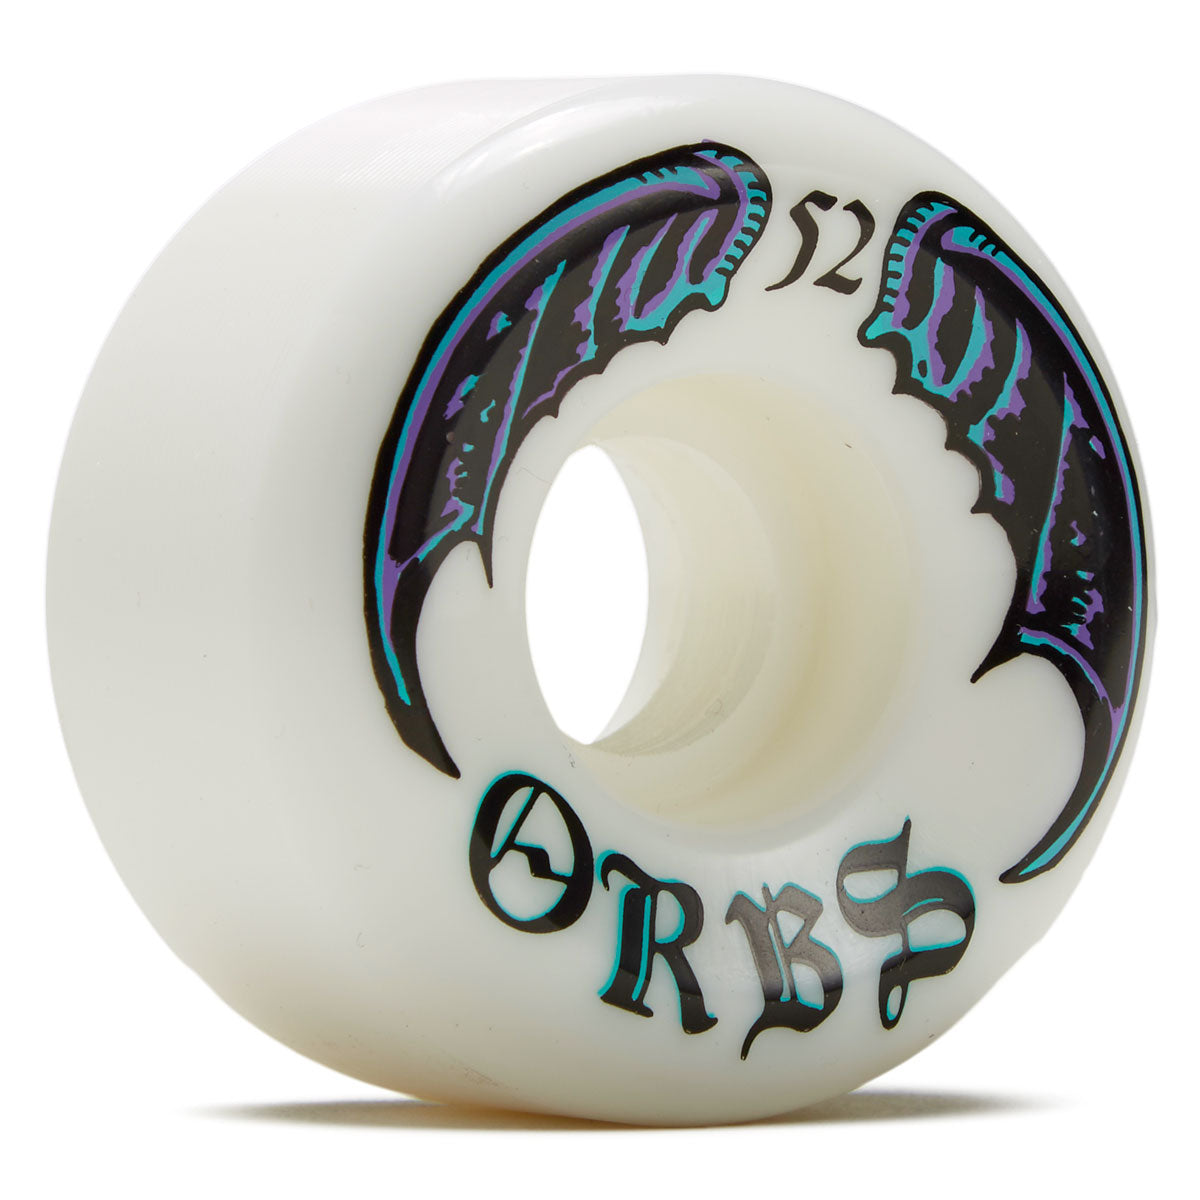 Welcome Orbs Specters Conical 99A Skateboard Wheels - White - 52mm image 1